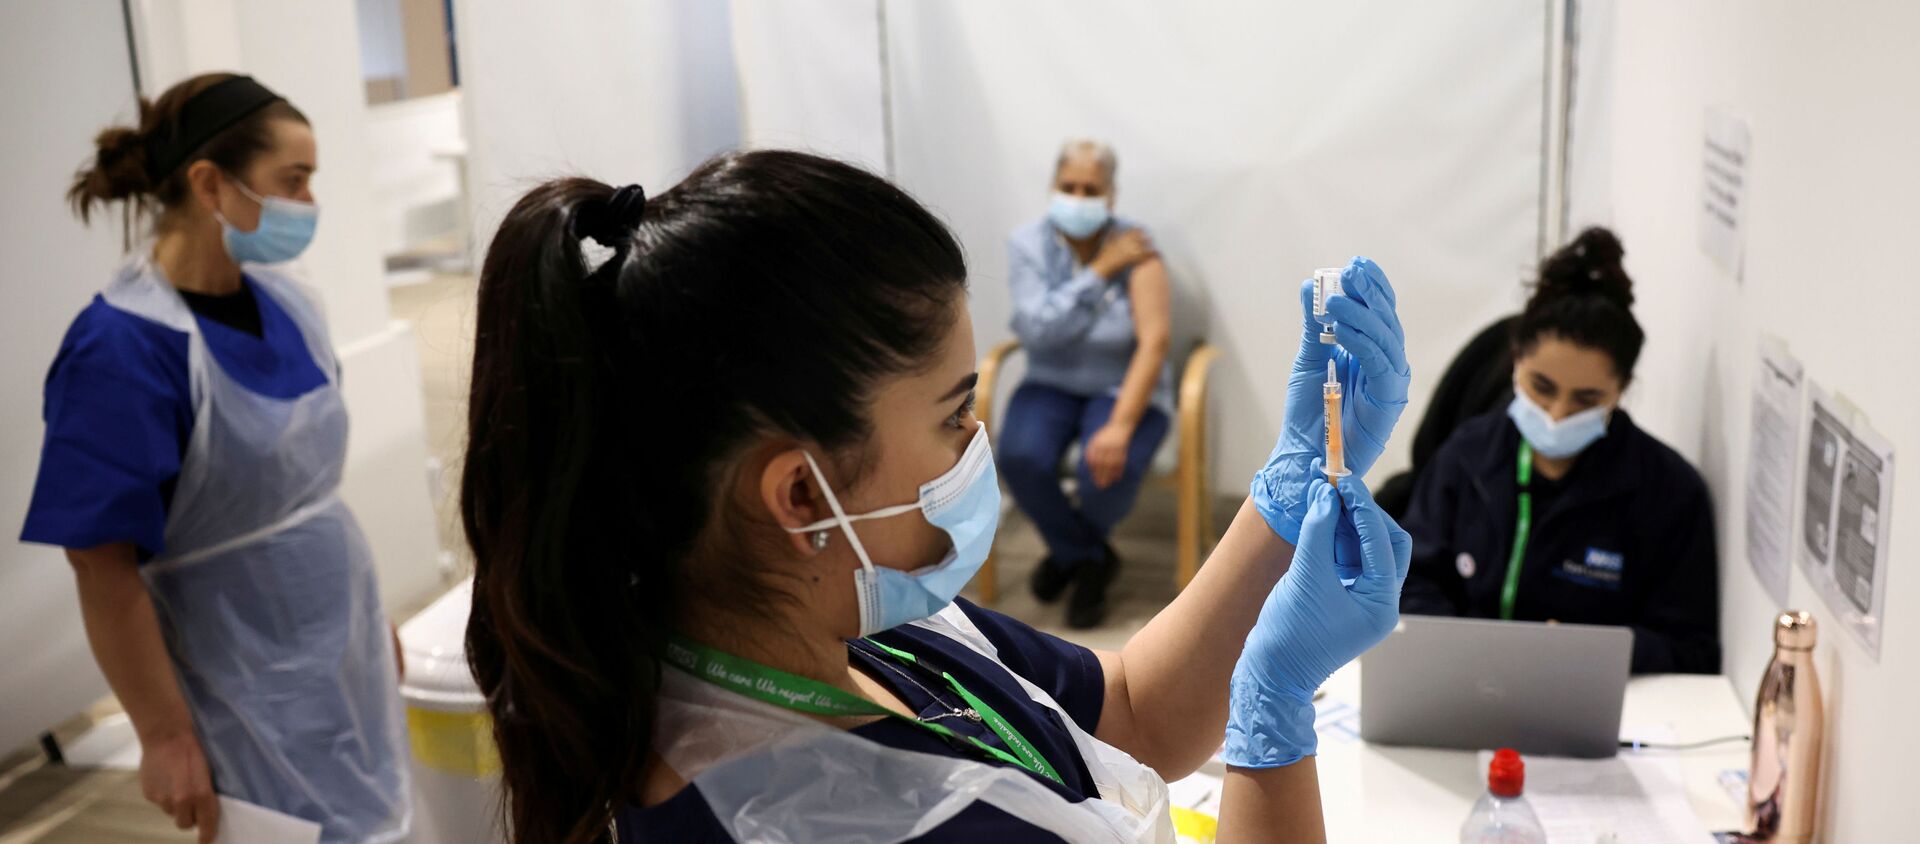 A person waits to get the coronavirus vaccine as a health worker prepares an injection with a dose, at a vaccination centre in Westfield Stratford City shopping centre, amid the outbreak of coronavirus disease (COVID-19), in London, Britain, February 18, 2021 - Sputnik International, 1920, 08.04.2021